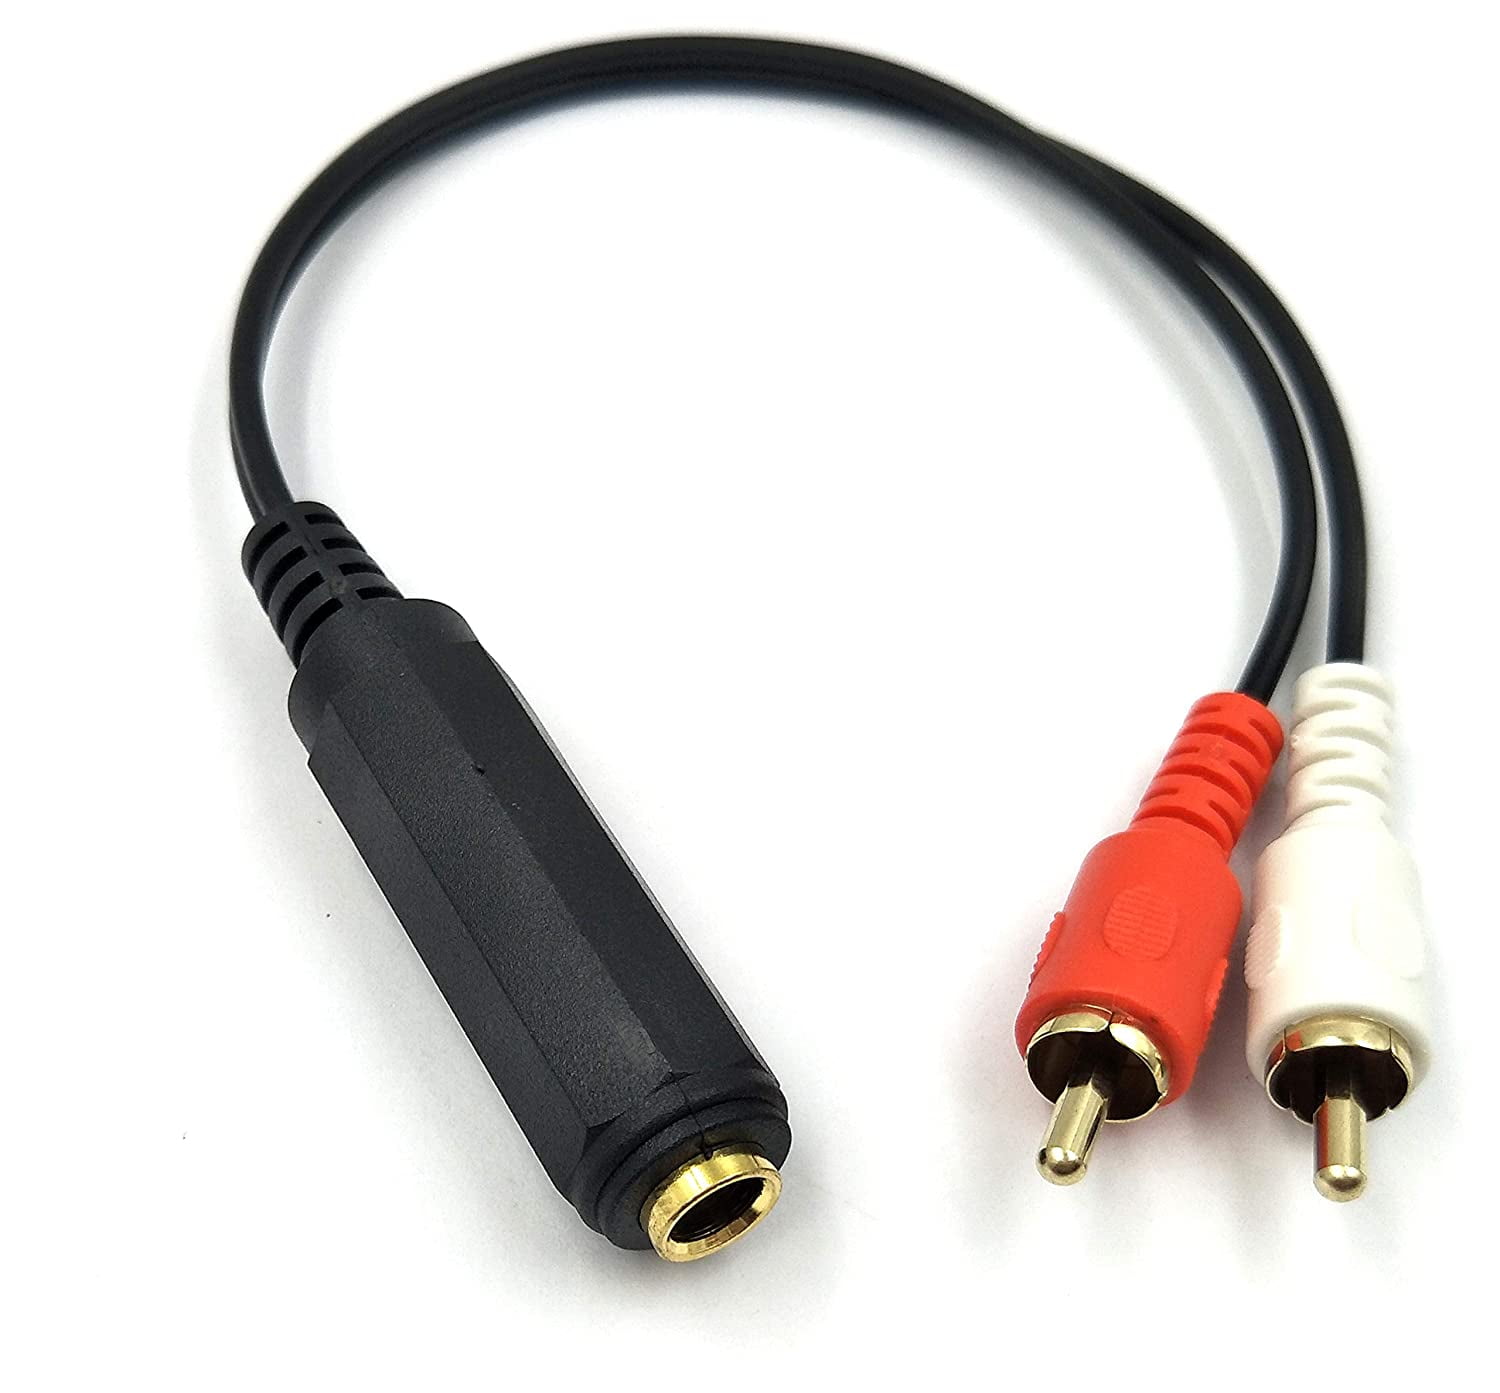 Rca To 14 Adapter Cable 635mm 14 Inch Trs Stereo Jack Female To 2 Rca Male Plug Y Splitter 